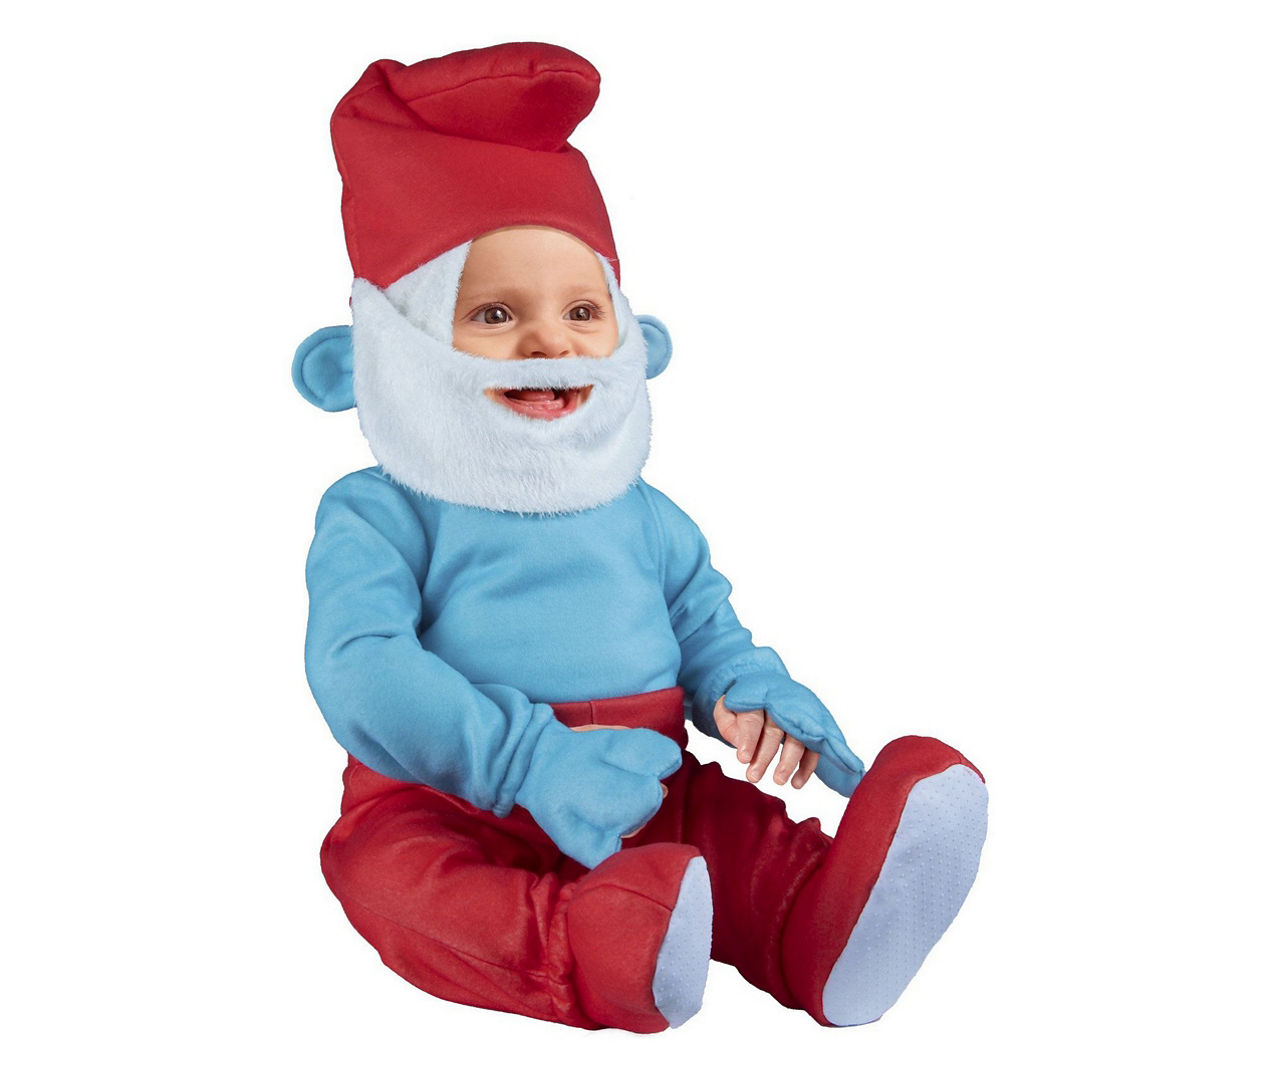 Toddler Size 2T The Smurfs Papa Smurf Costume